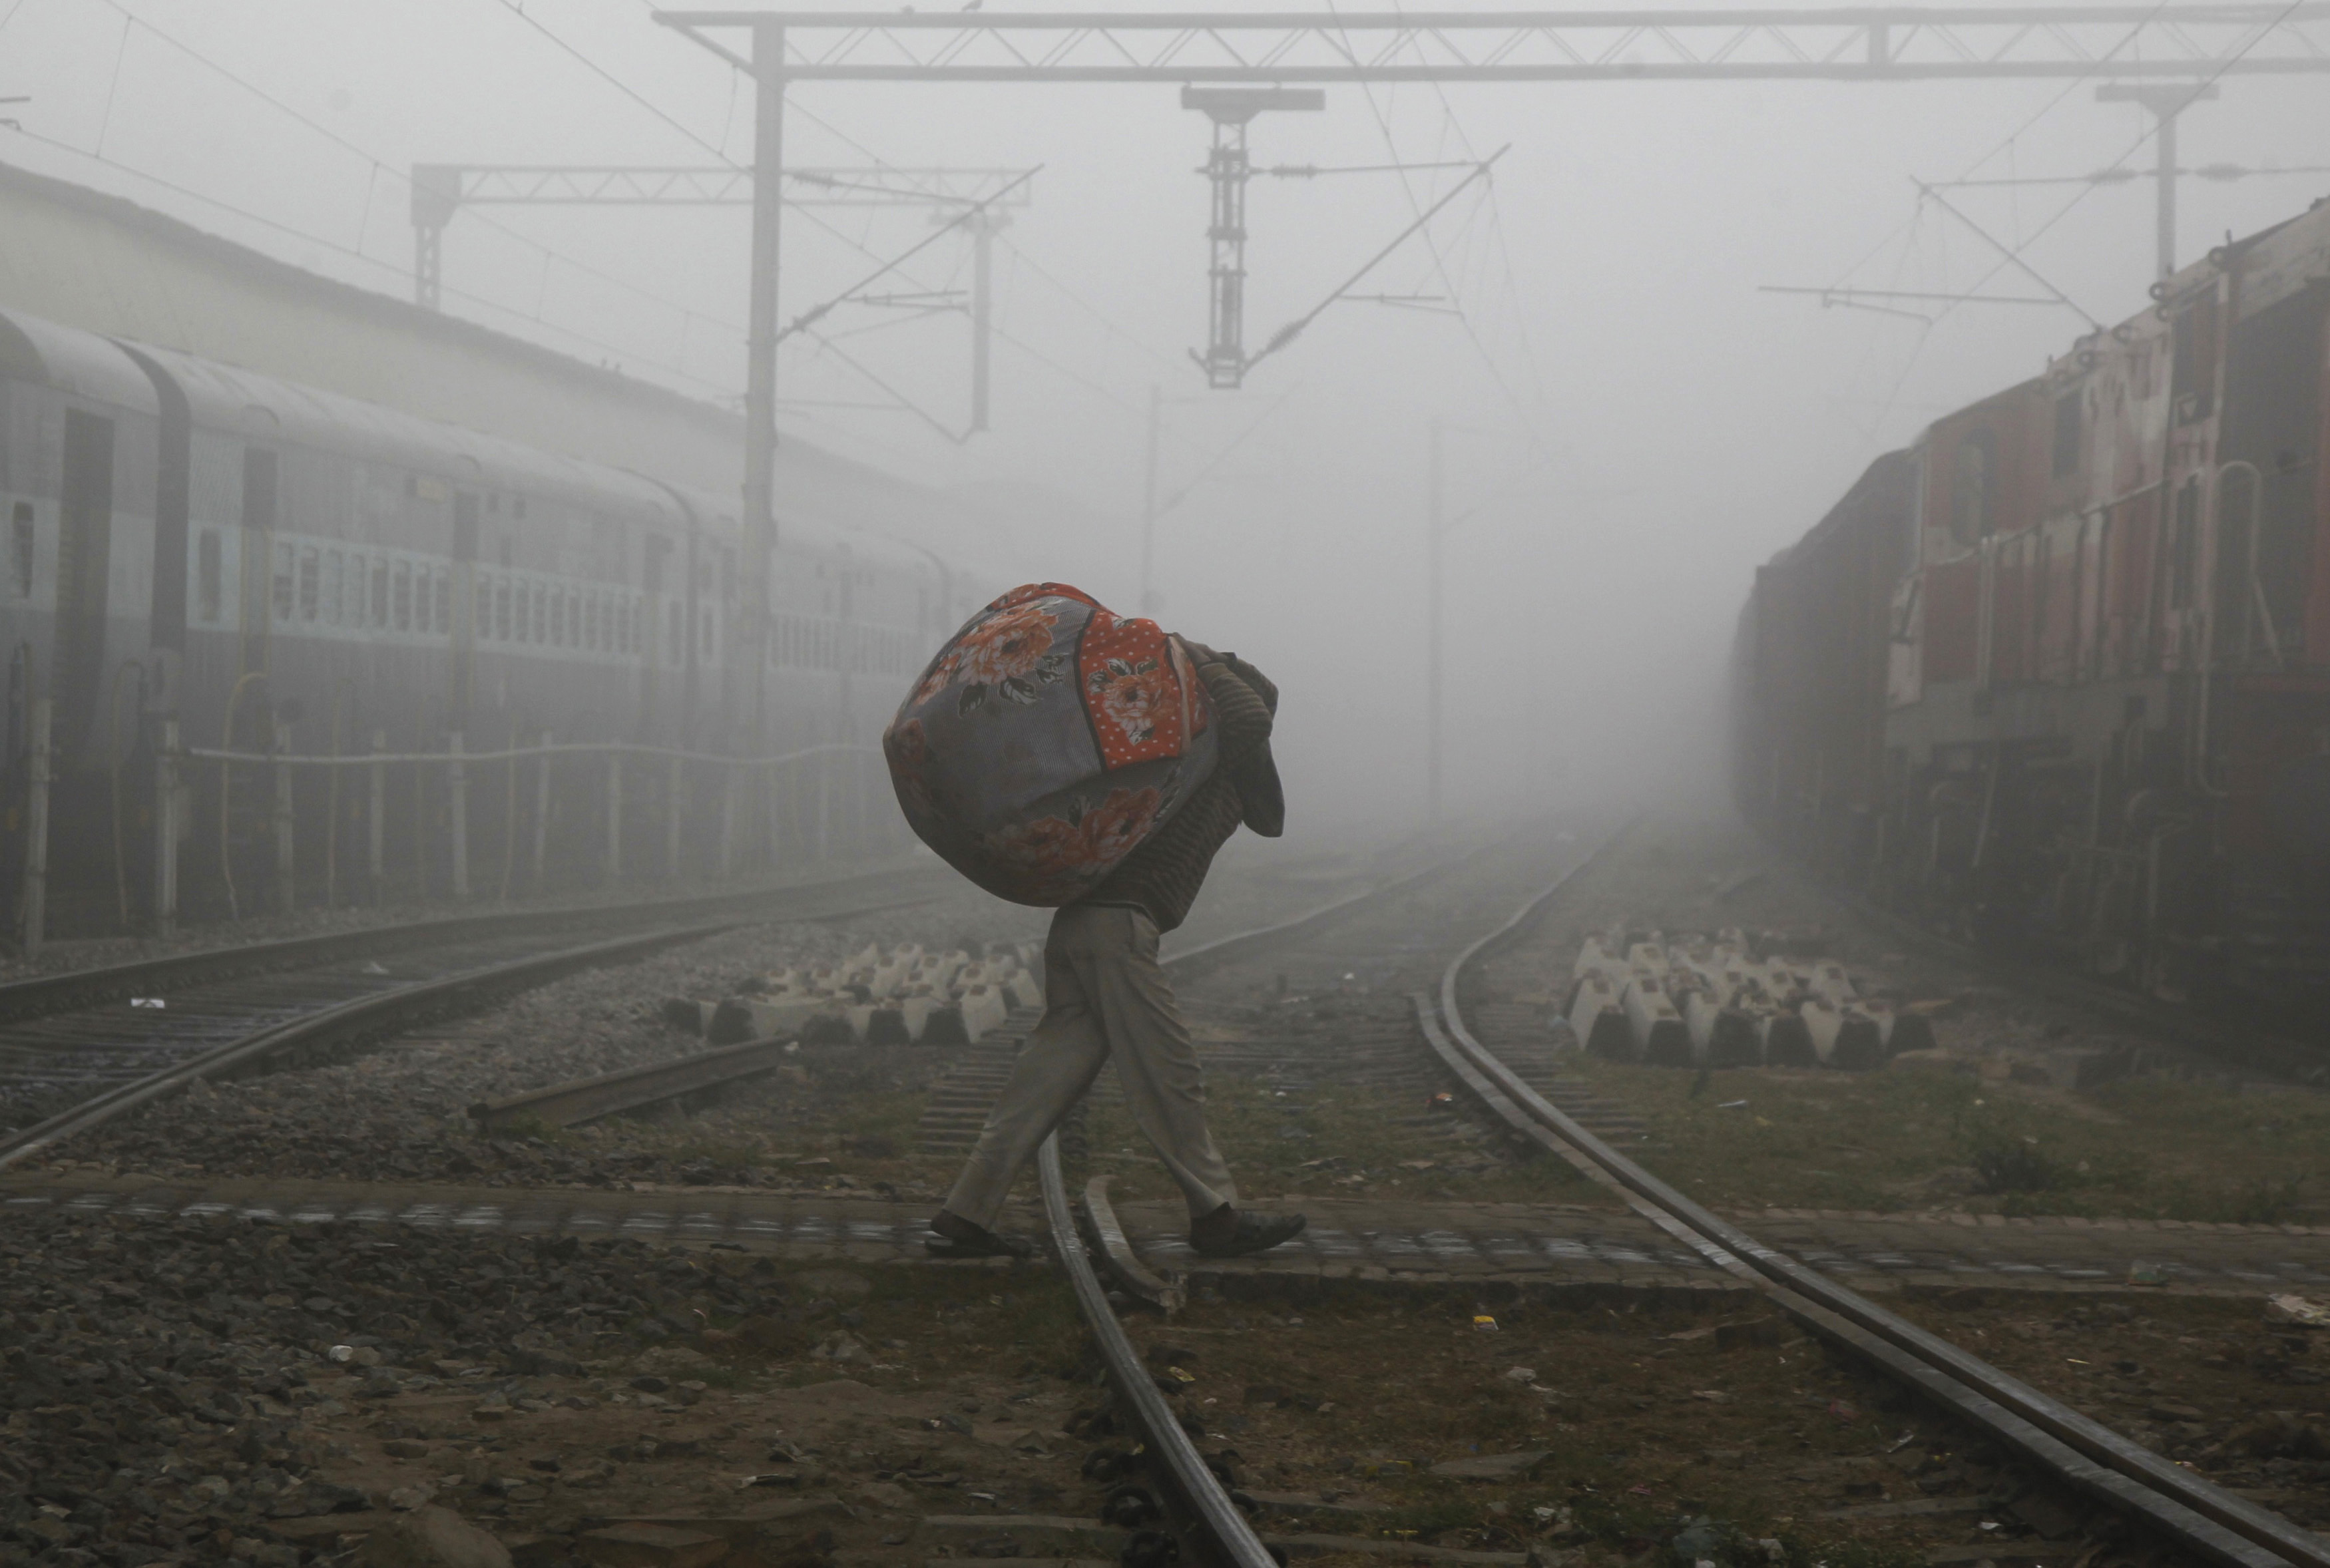 A man carries blankets as he crosses railway tracks on a foggy and cold winter morning in Allahabad